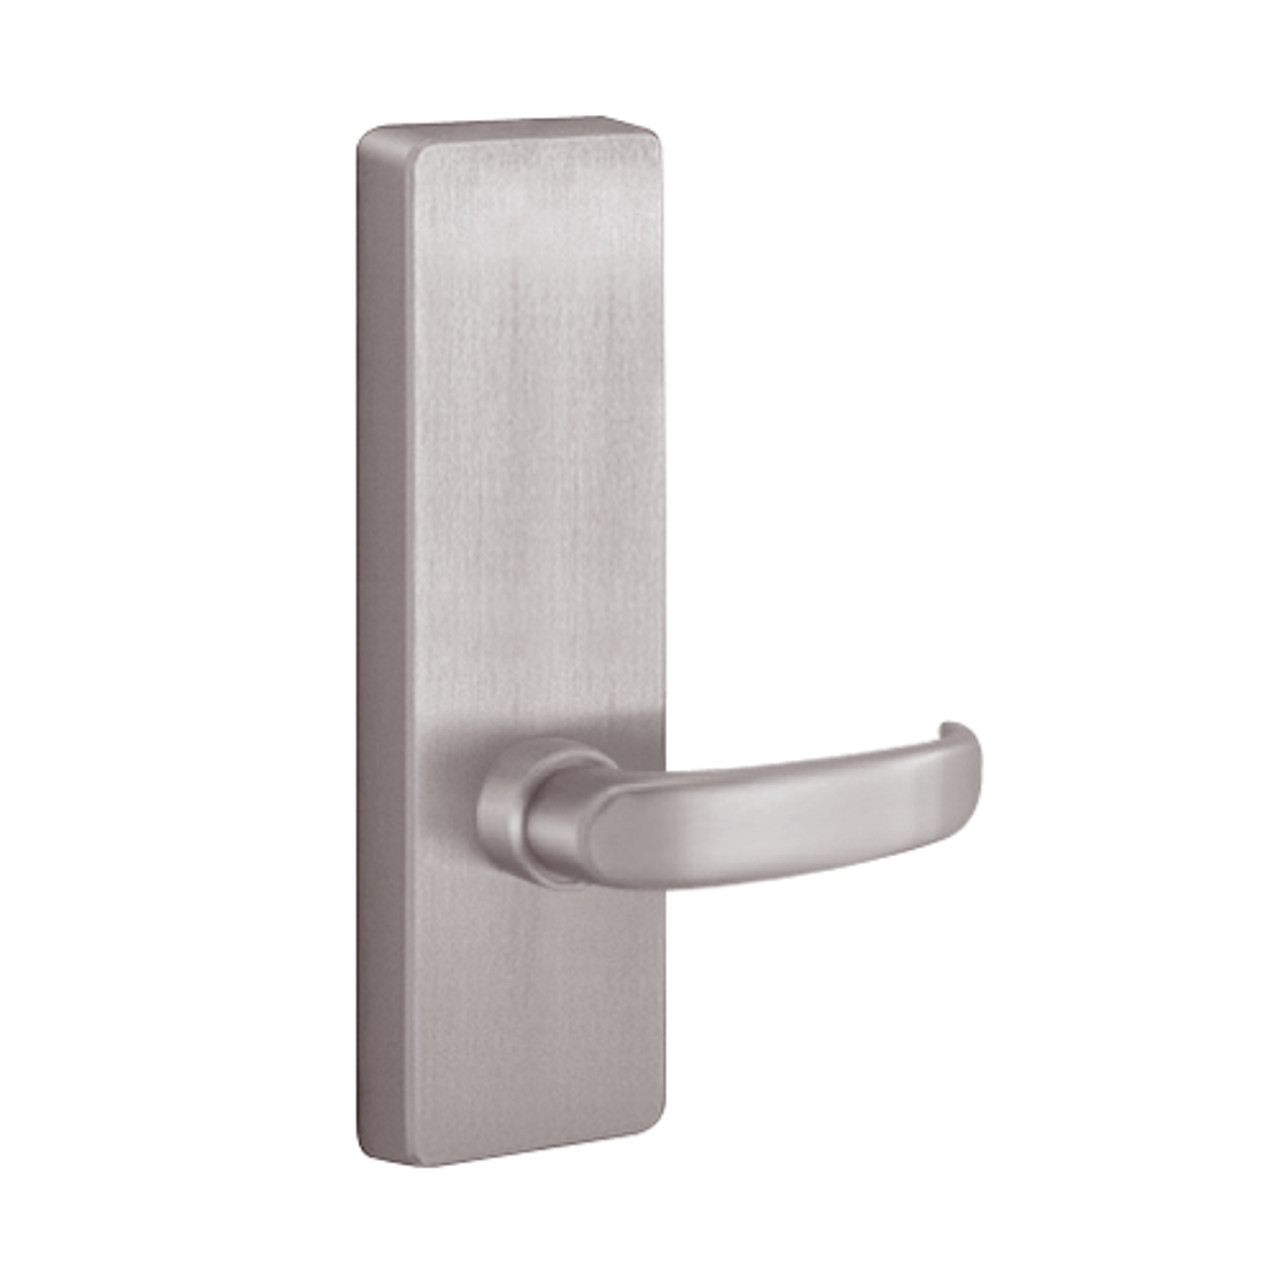 4902D-630-LHR PHI Dummy Trim with D Lever Design for Apex and Olympian Series Exit Device in Satin Stainless Steel Finish